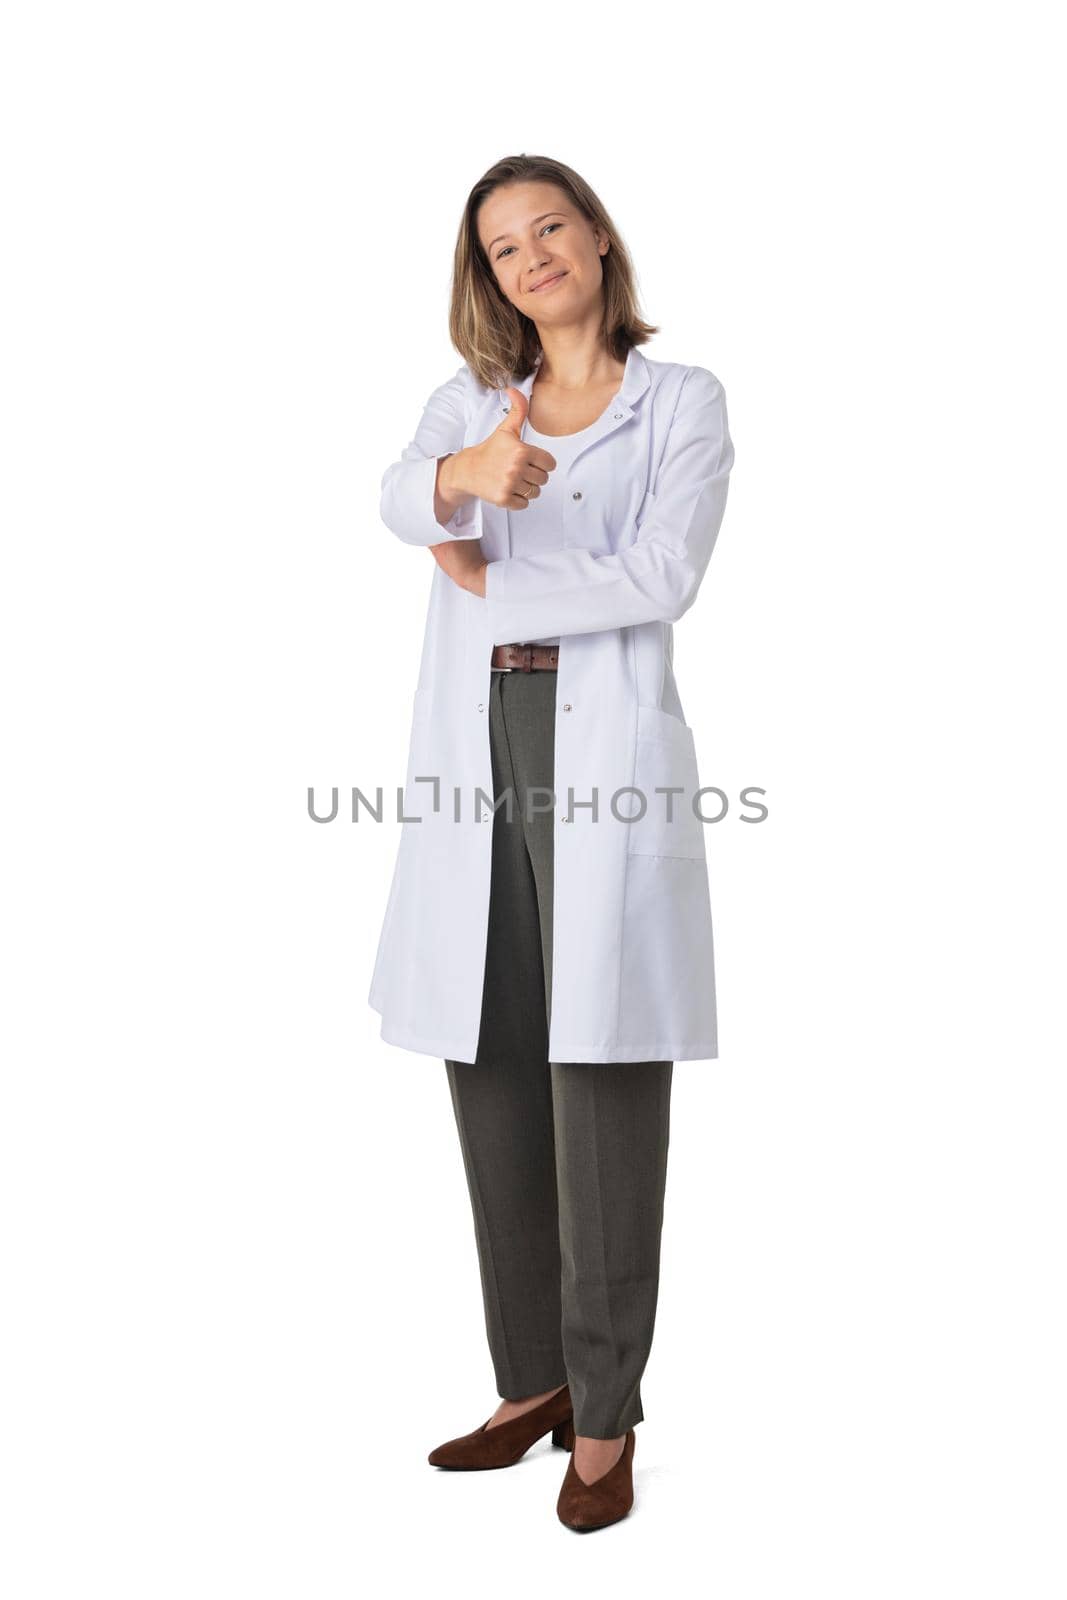 Doctor woman posing in a studio by ALotOfPeople